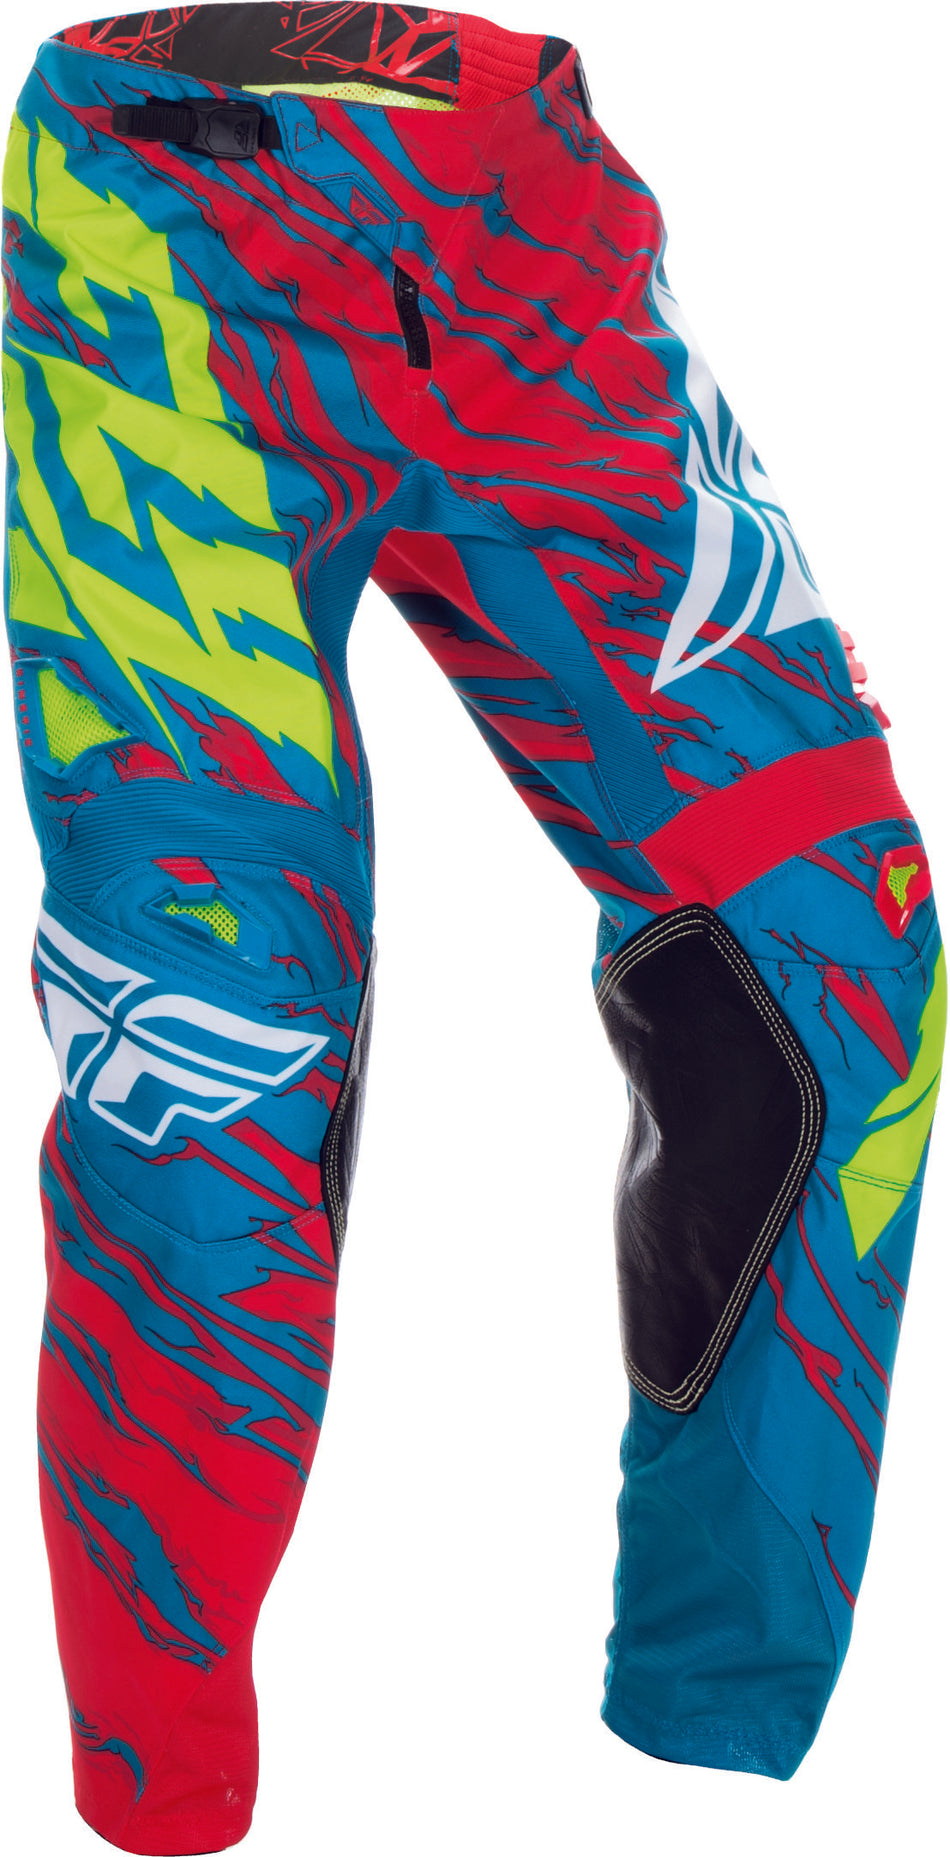 FLY RACING Kinetic Relapse Pant Teal/Red Sz 34 370-43934